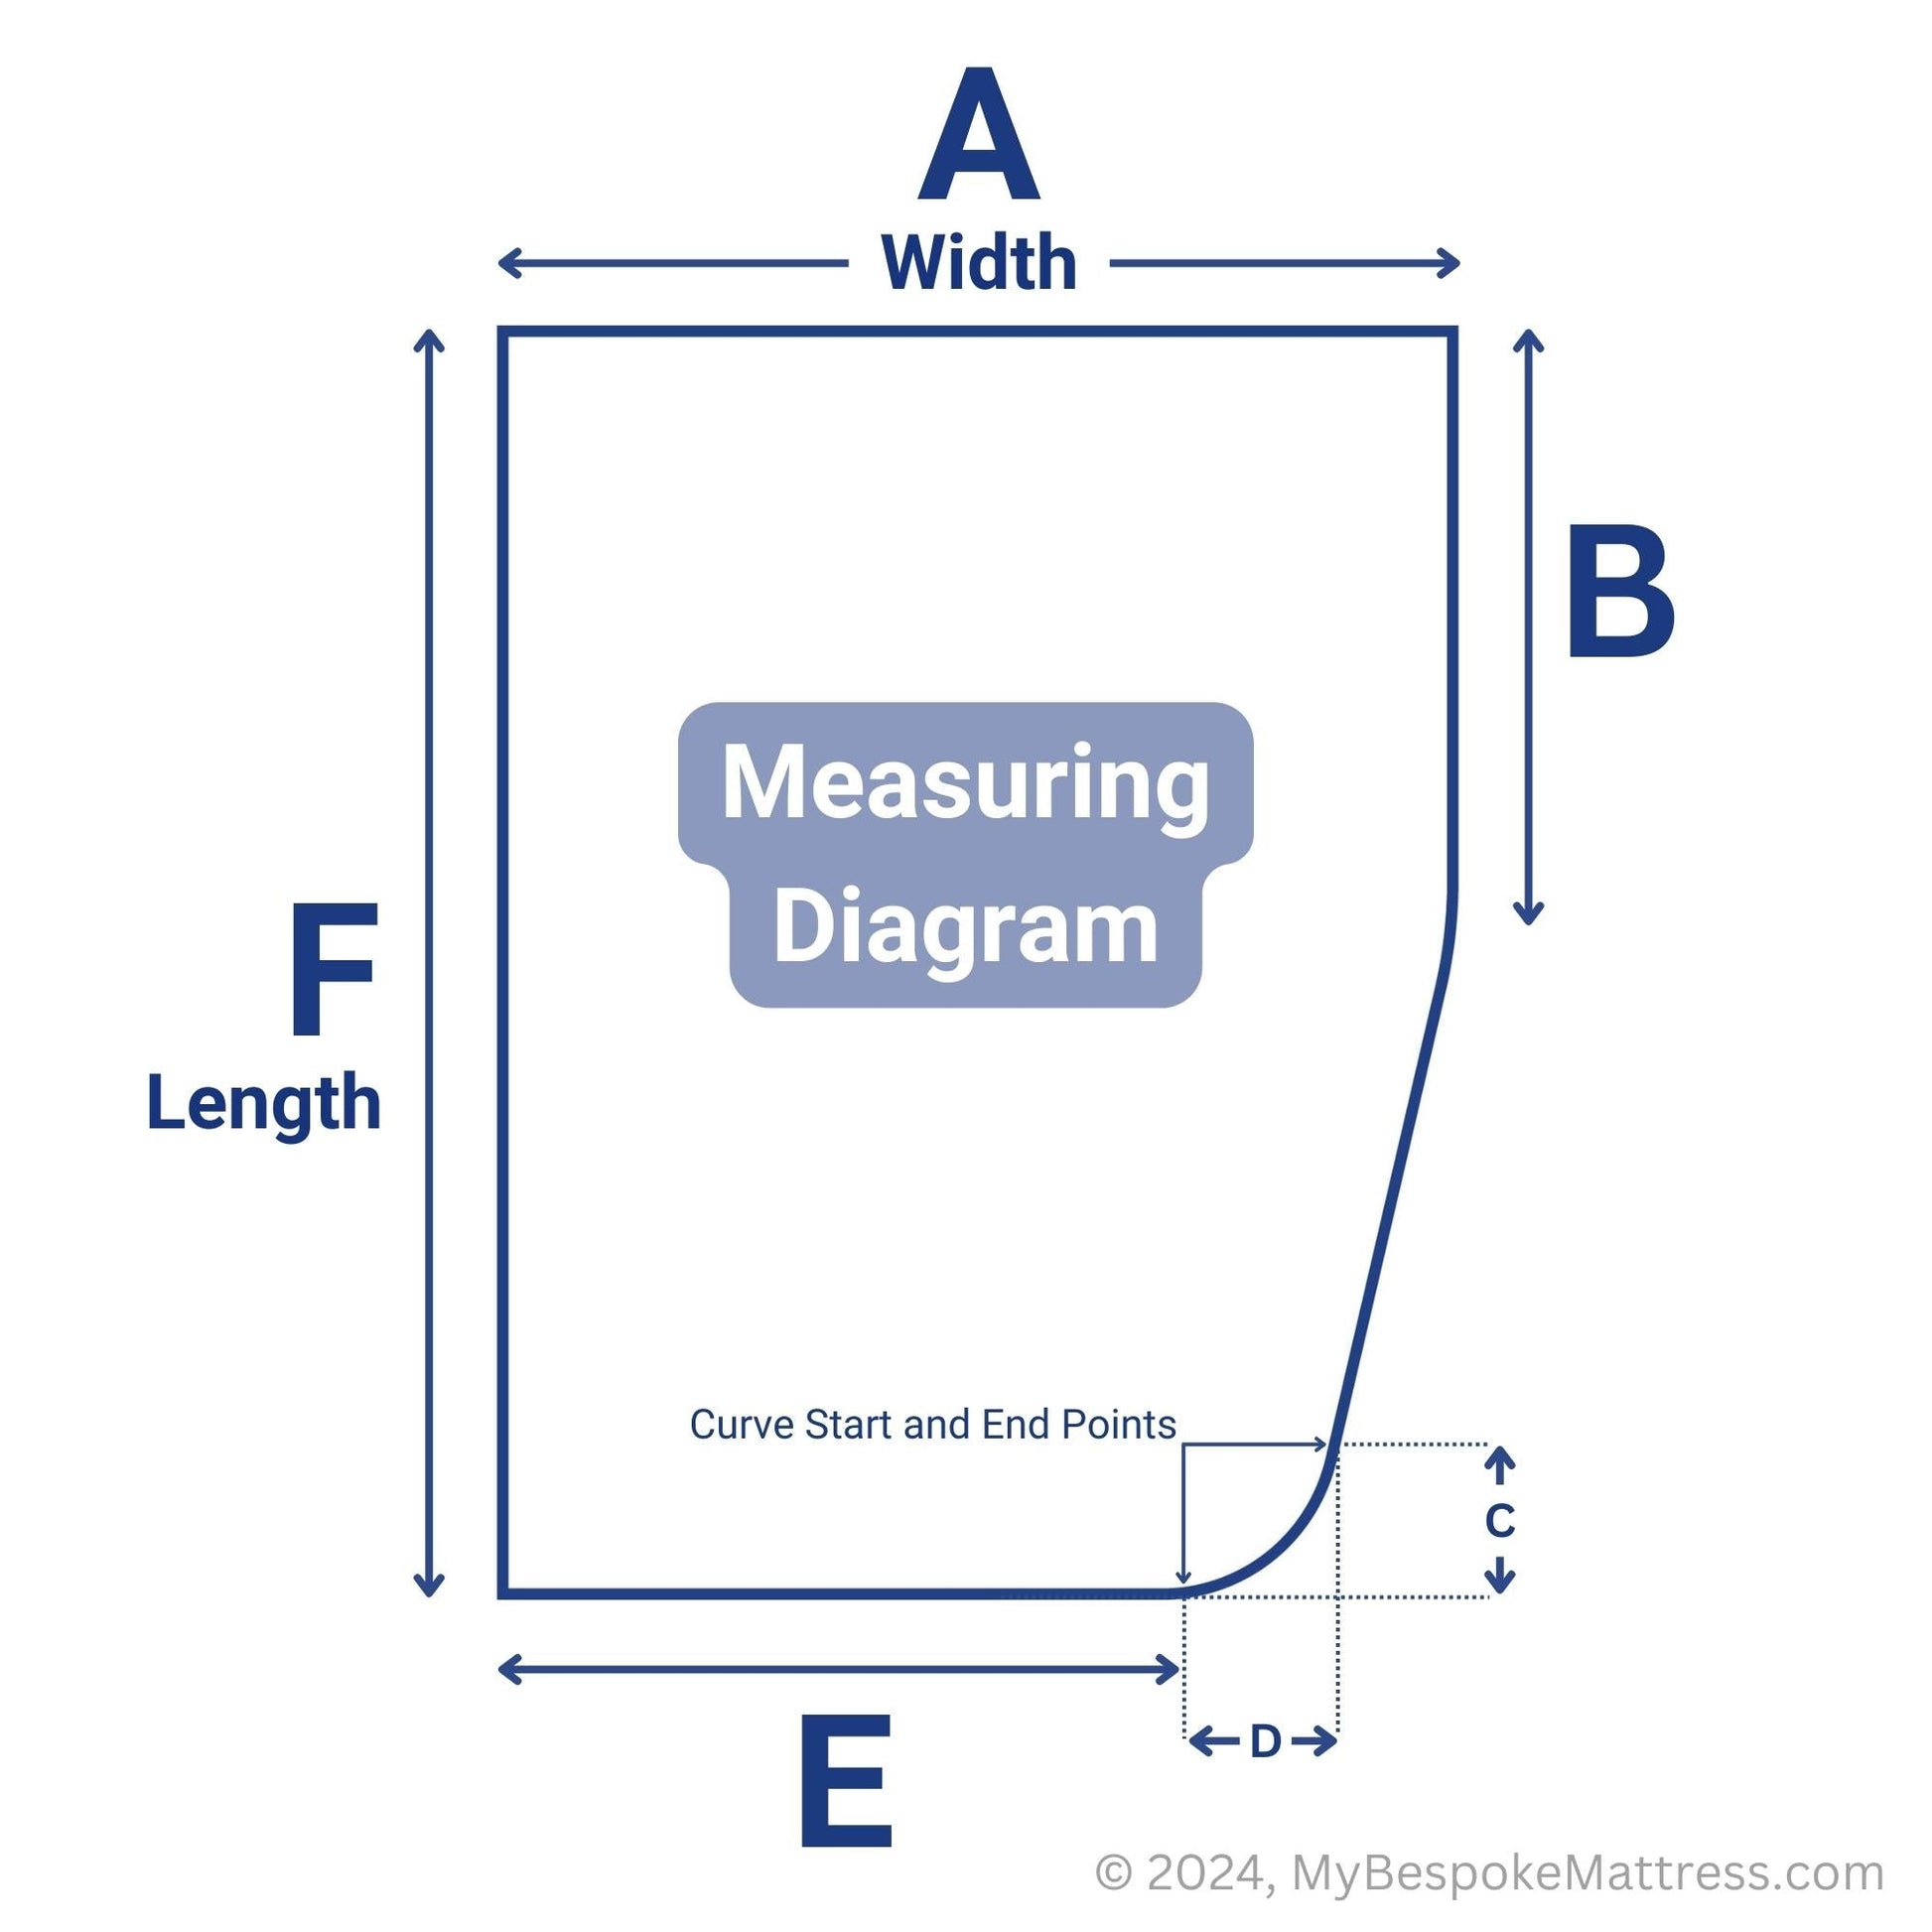 Easy-to-follow diagram for measuring a custom caravan mattress with a large curved corner cut-out on the right side.